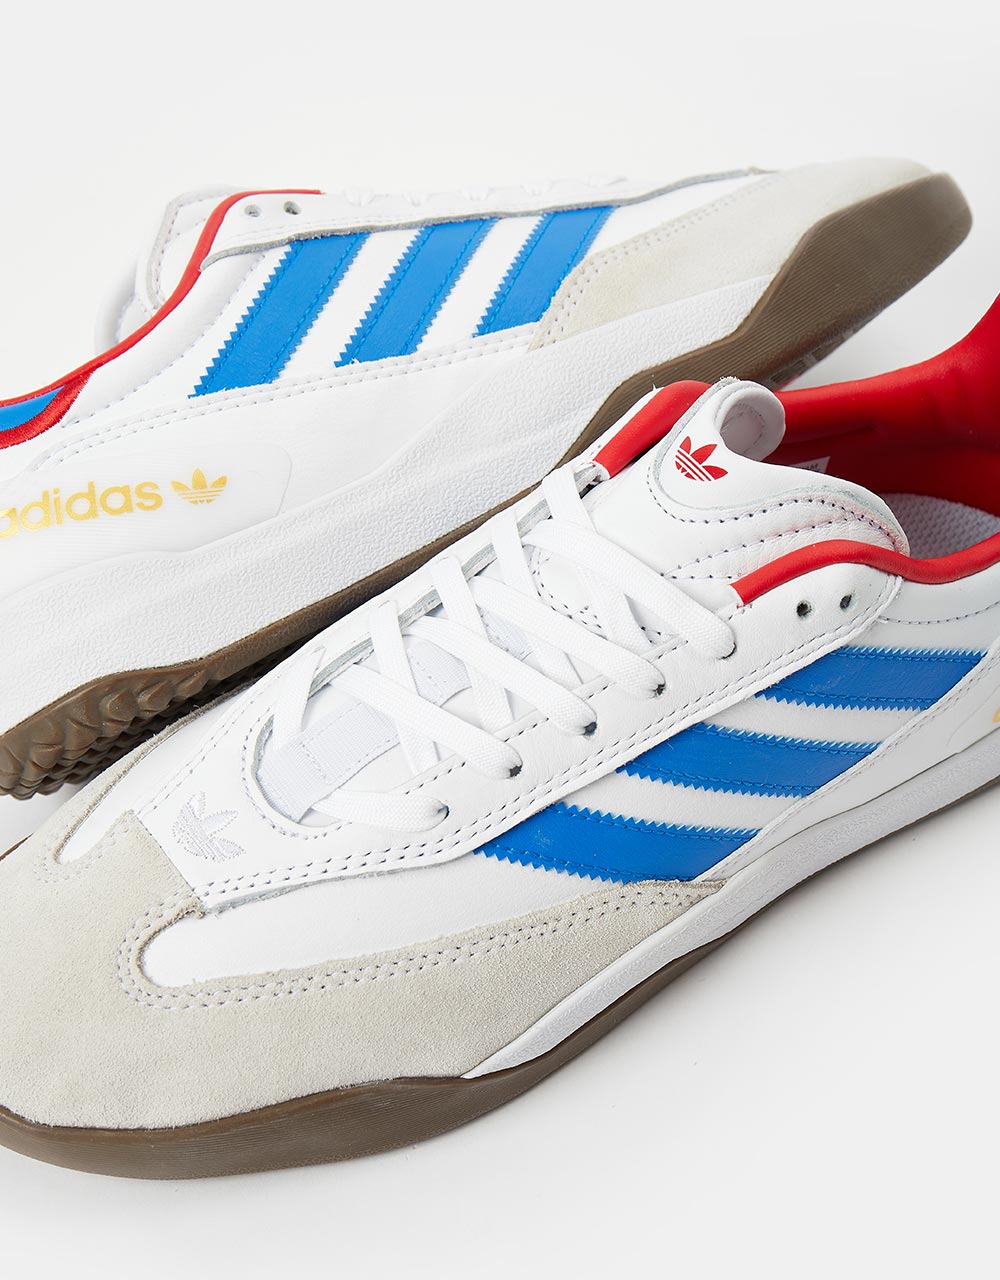 adidas Copa Nationale Skate Shoes - White/Bluebird/Scarlet